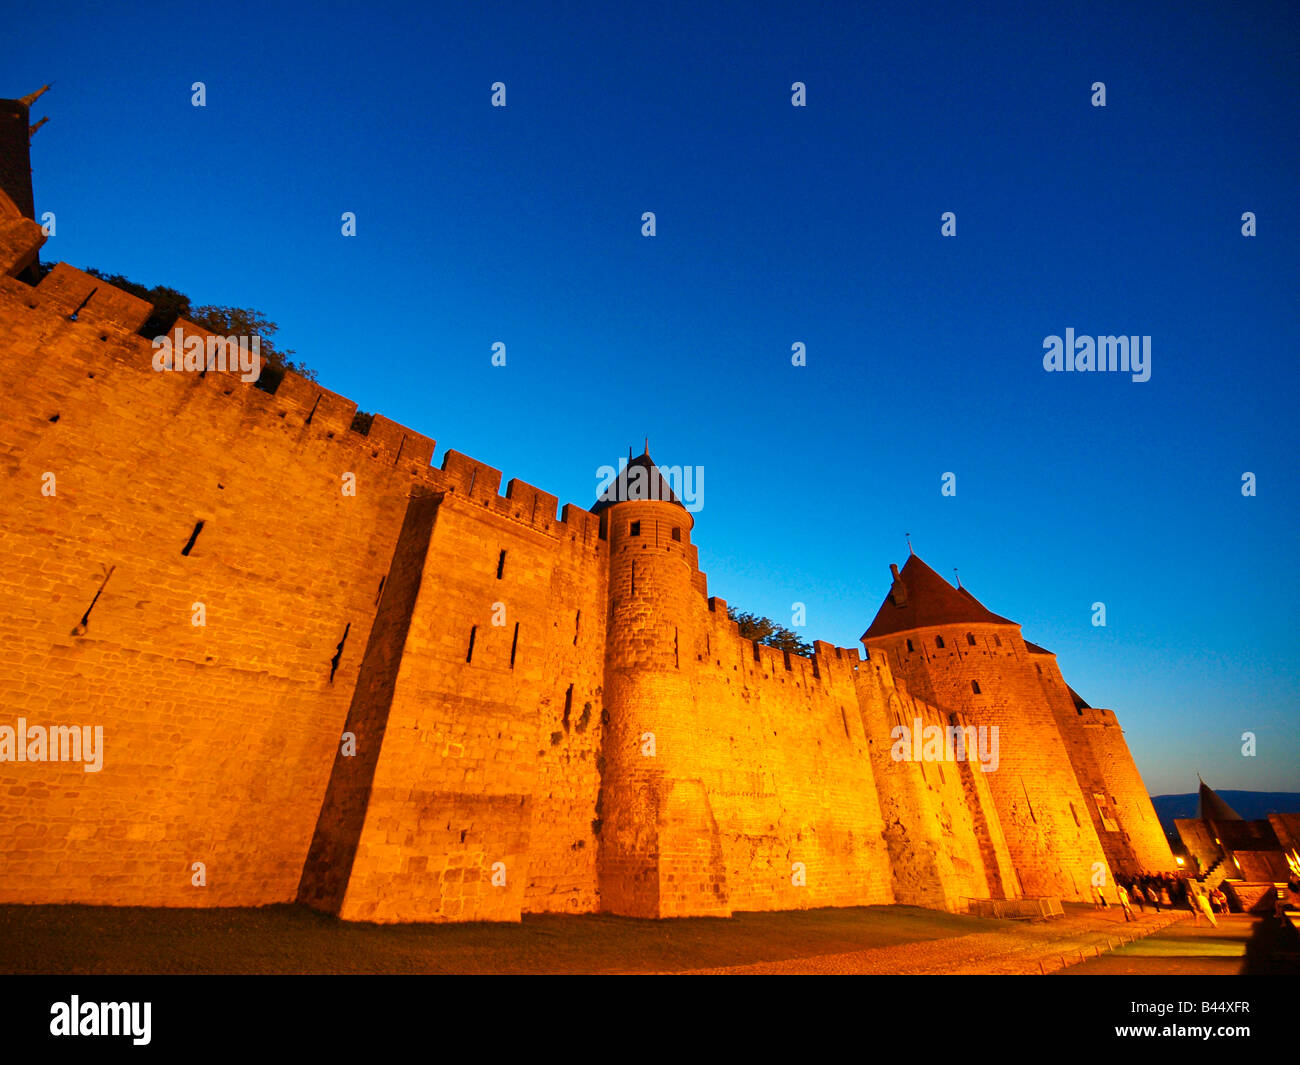 medieval fortified city Carcassonne, France Stock Photo